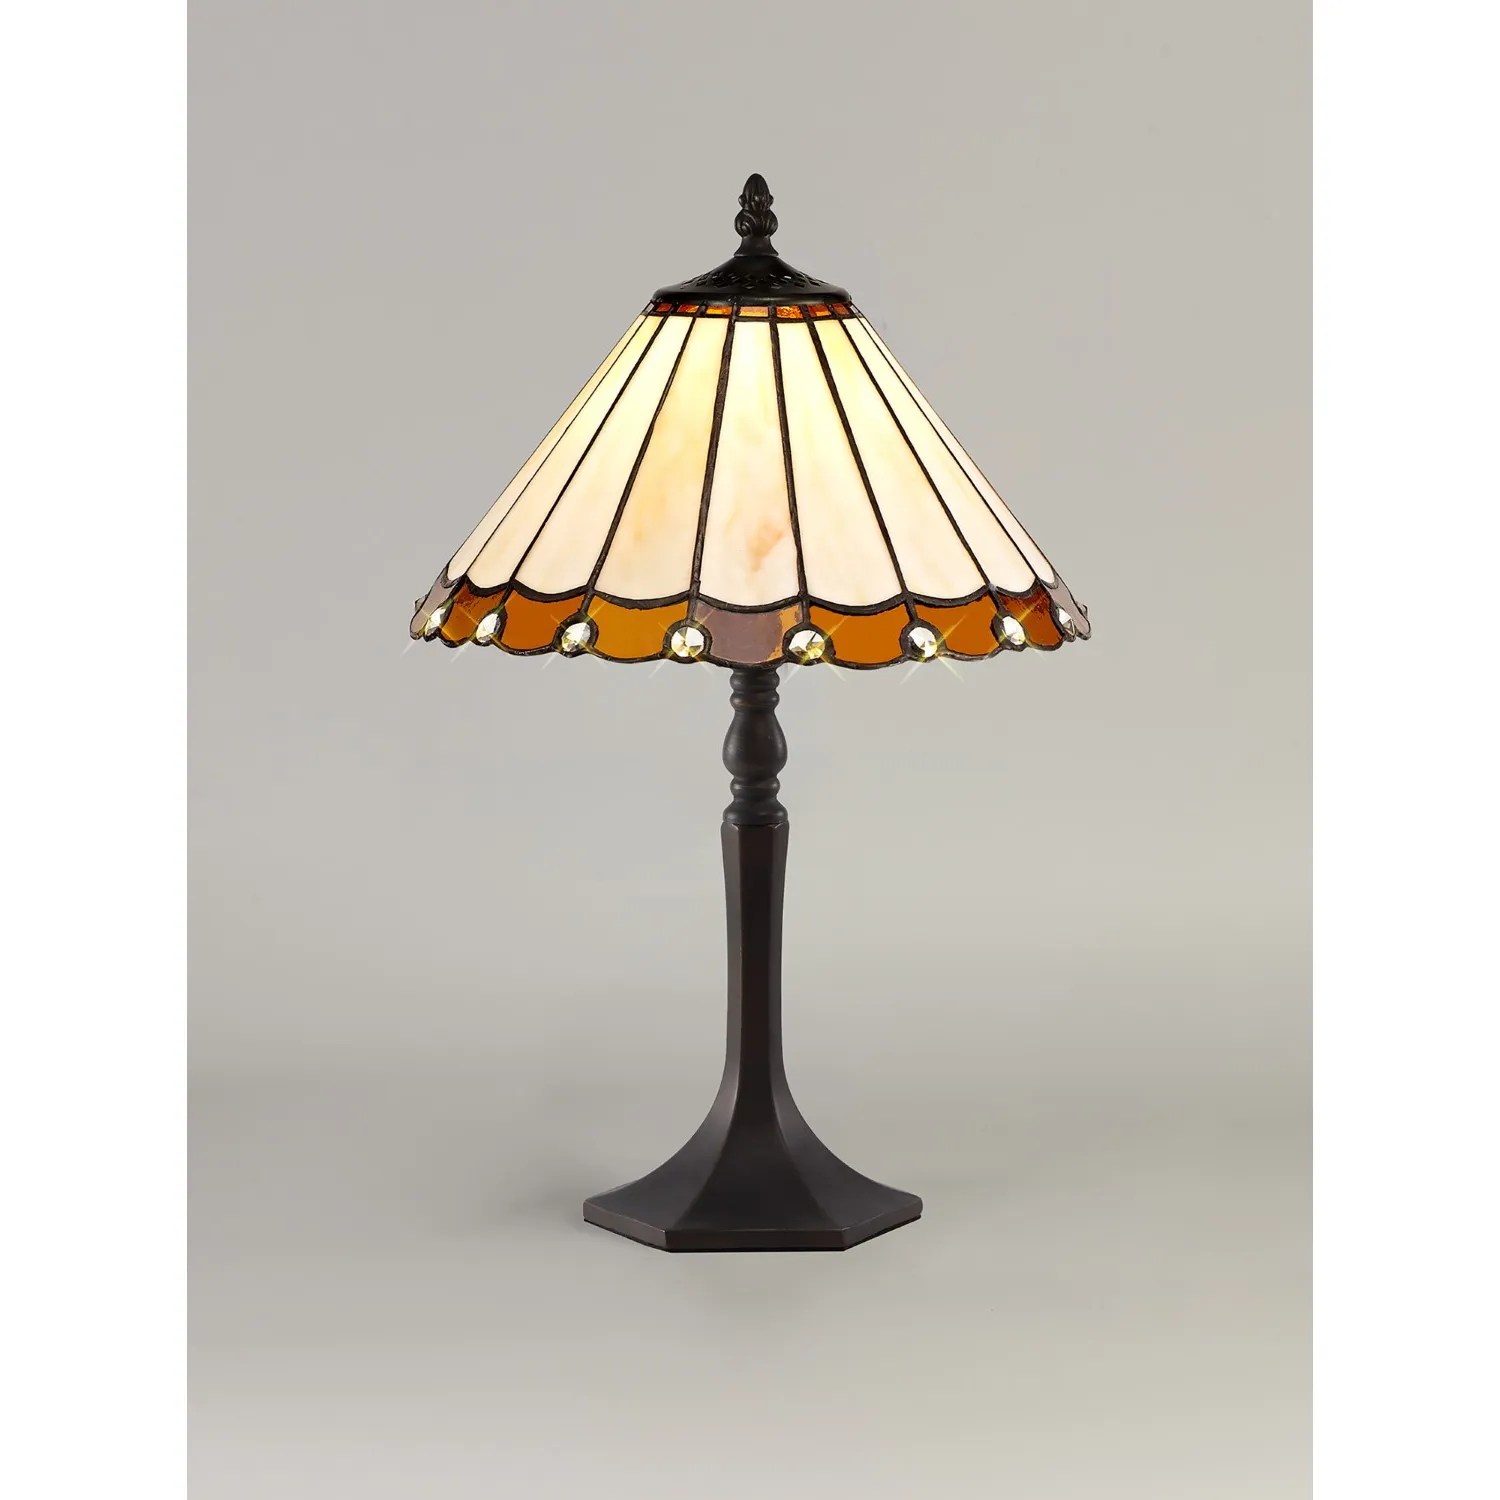 Ware 1 Light Octagonal Table Lamp E27 With 30cm Tiffany Shade, Amber Cream Crystal Aged Antique Brass